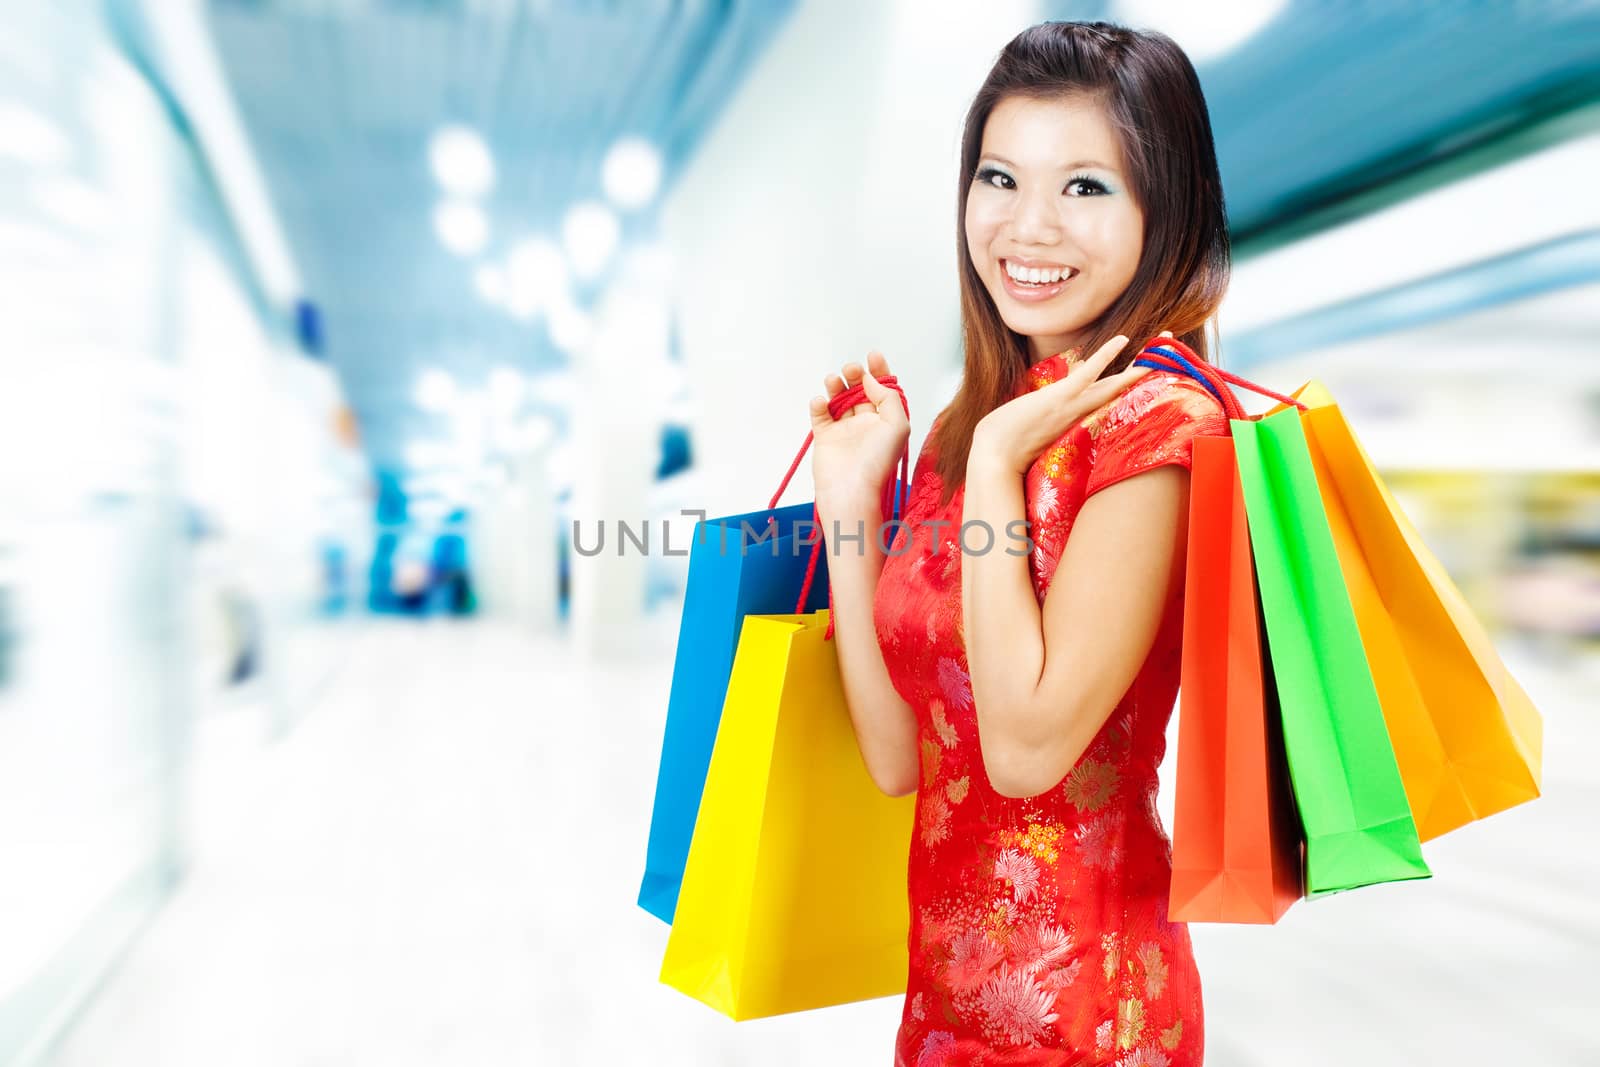 Oriental woman in red Traditional Chinese Cheongsam with shopping bag, standing inside mall.